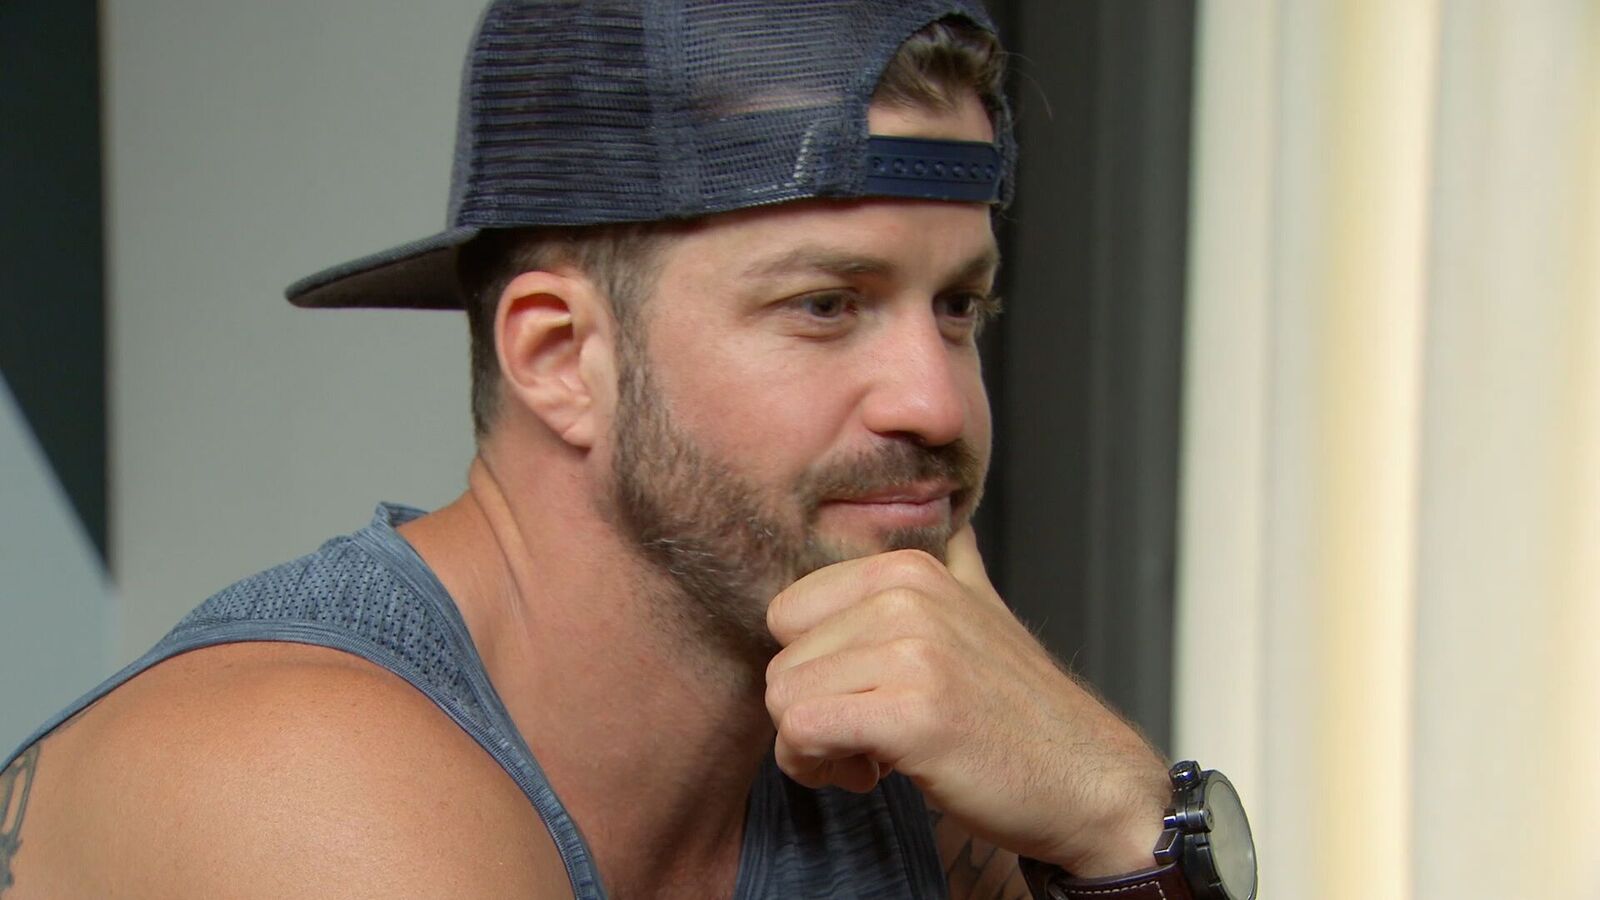 MTV The Challenge: Is the Johnny Bananas Era over?